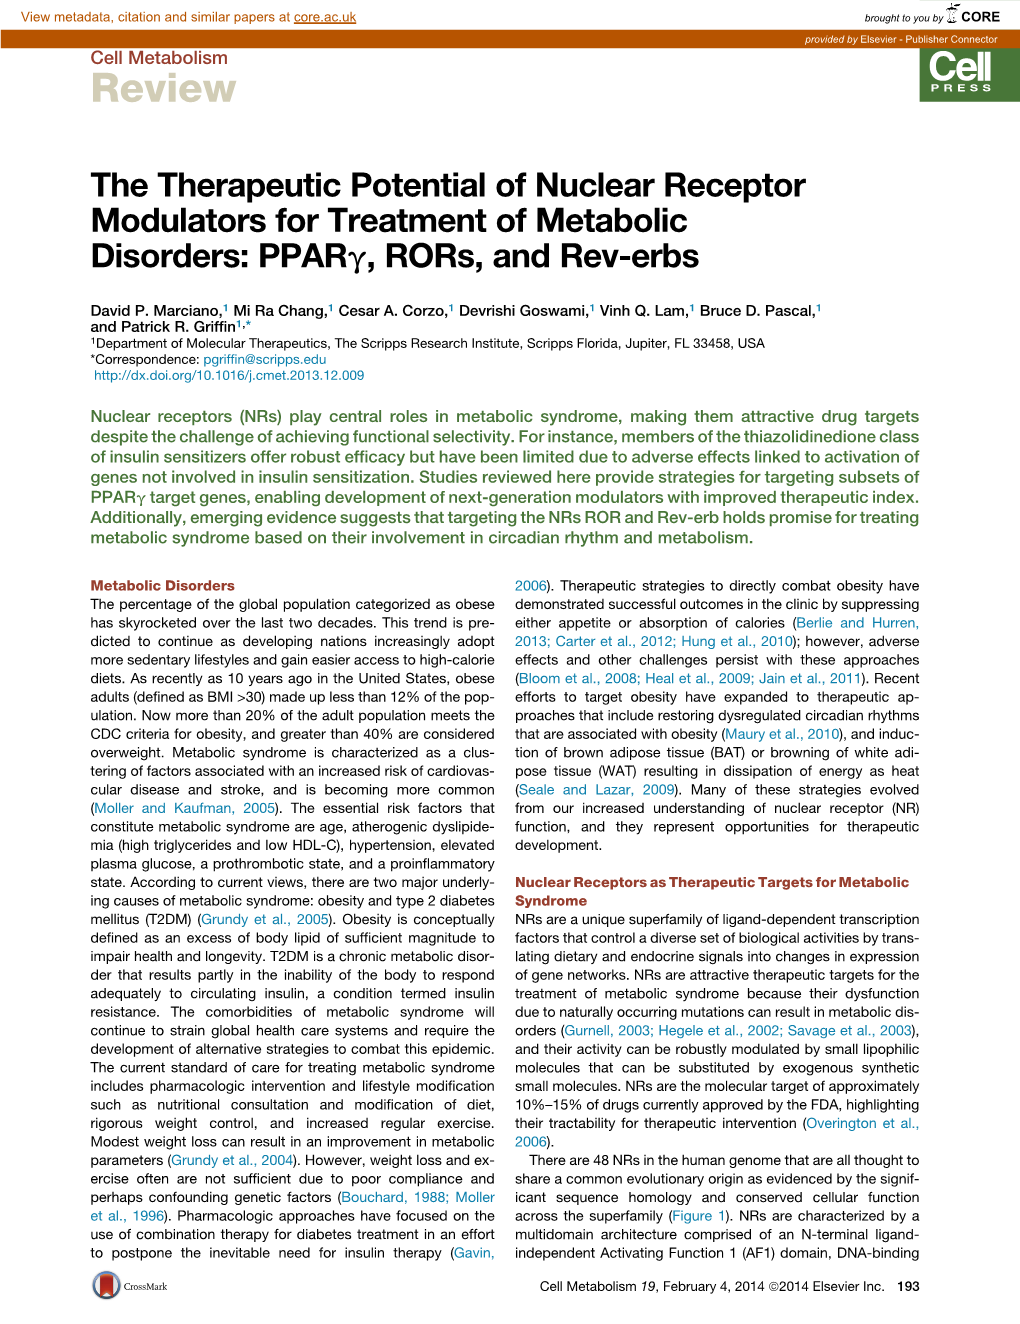 The Therapeutic Potential of Nuclear Receptor Modulators for Treatment of Metabolic Disorders: Pparg,Rors,Andrev-Erbs